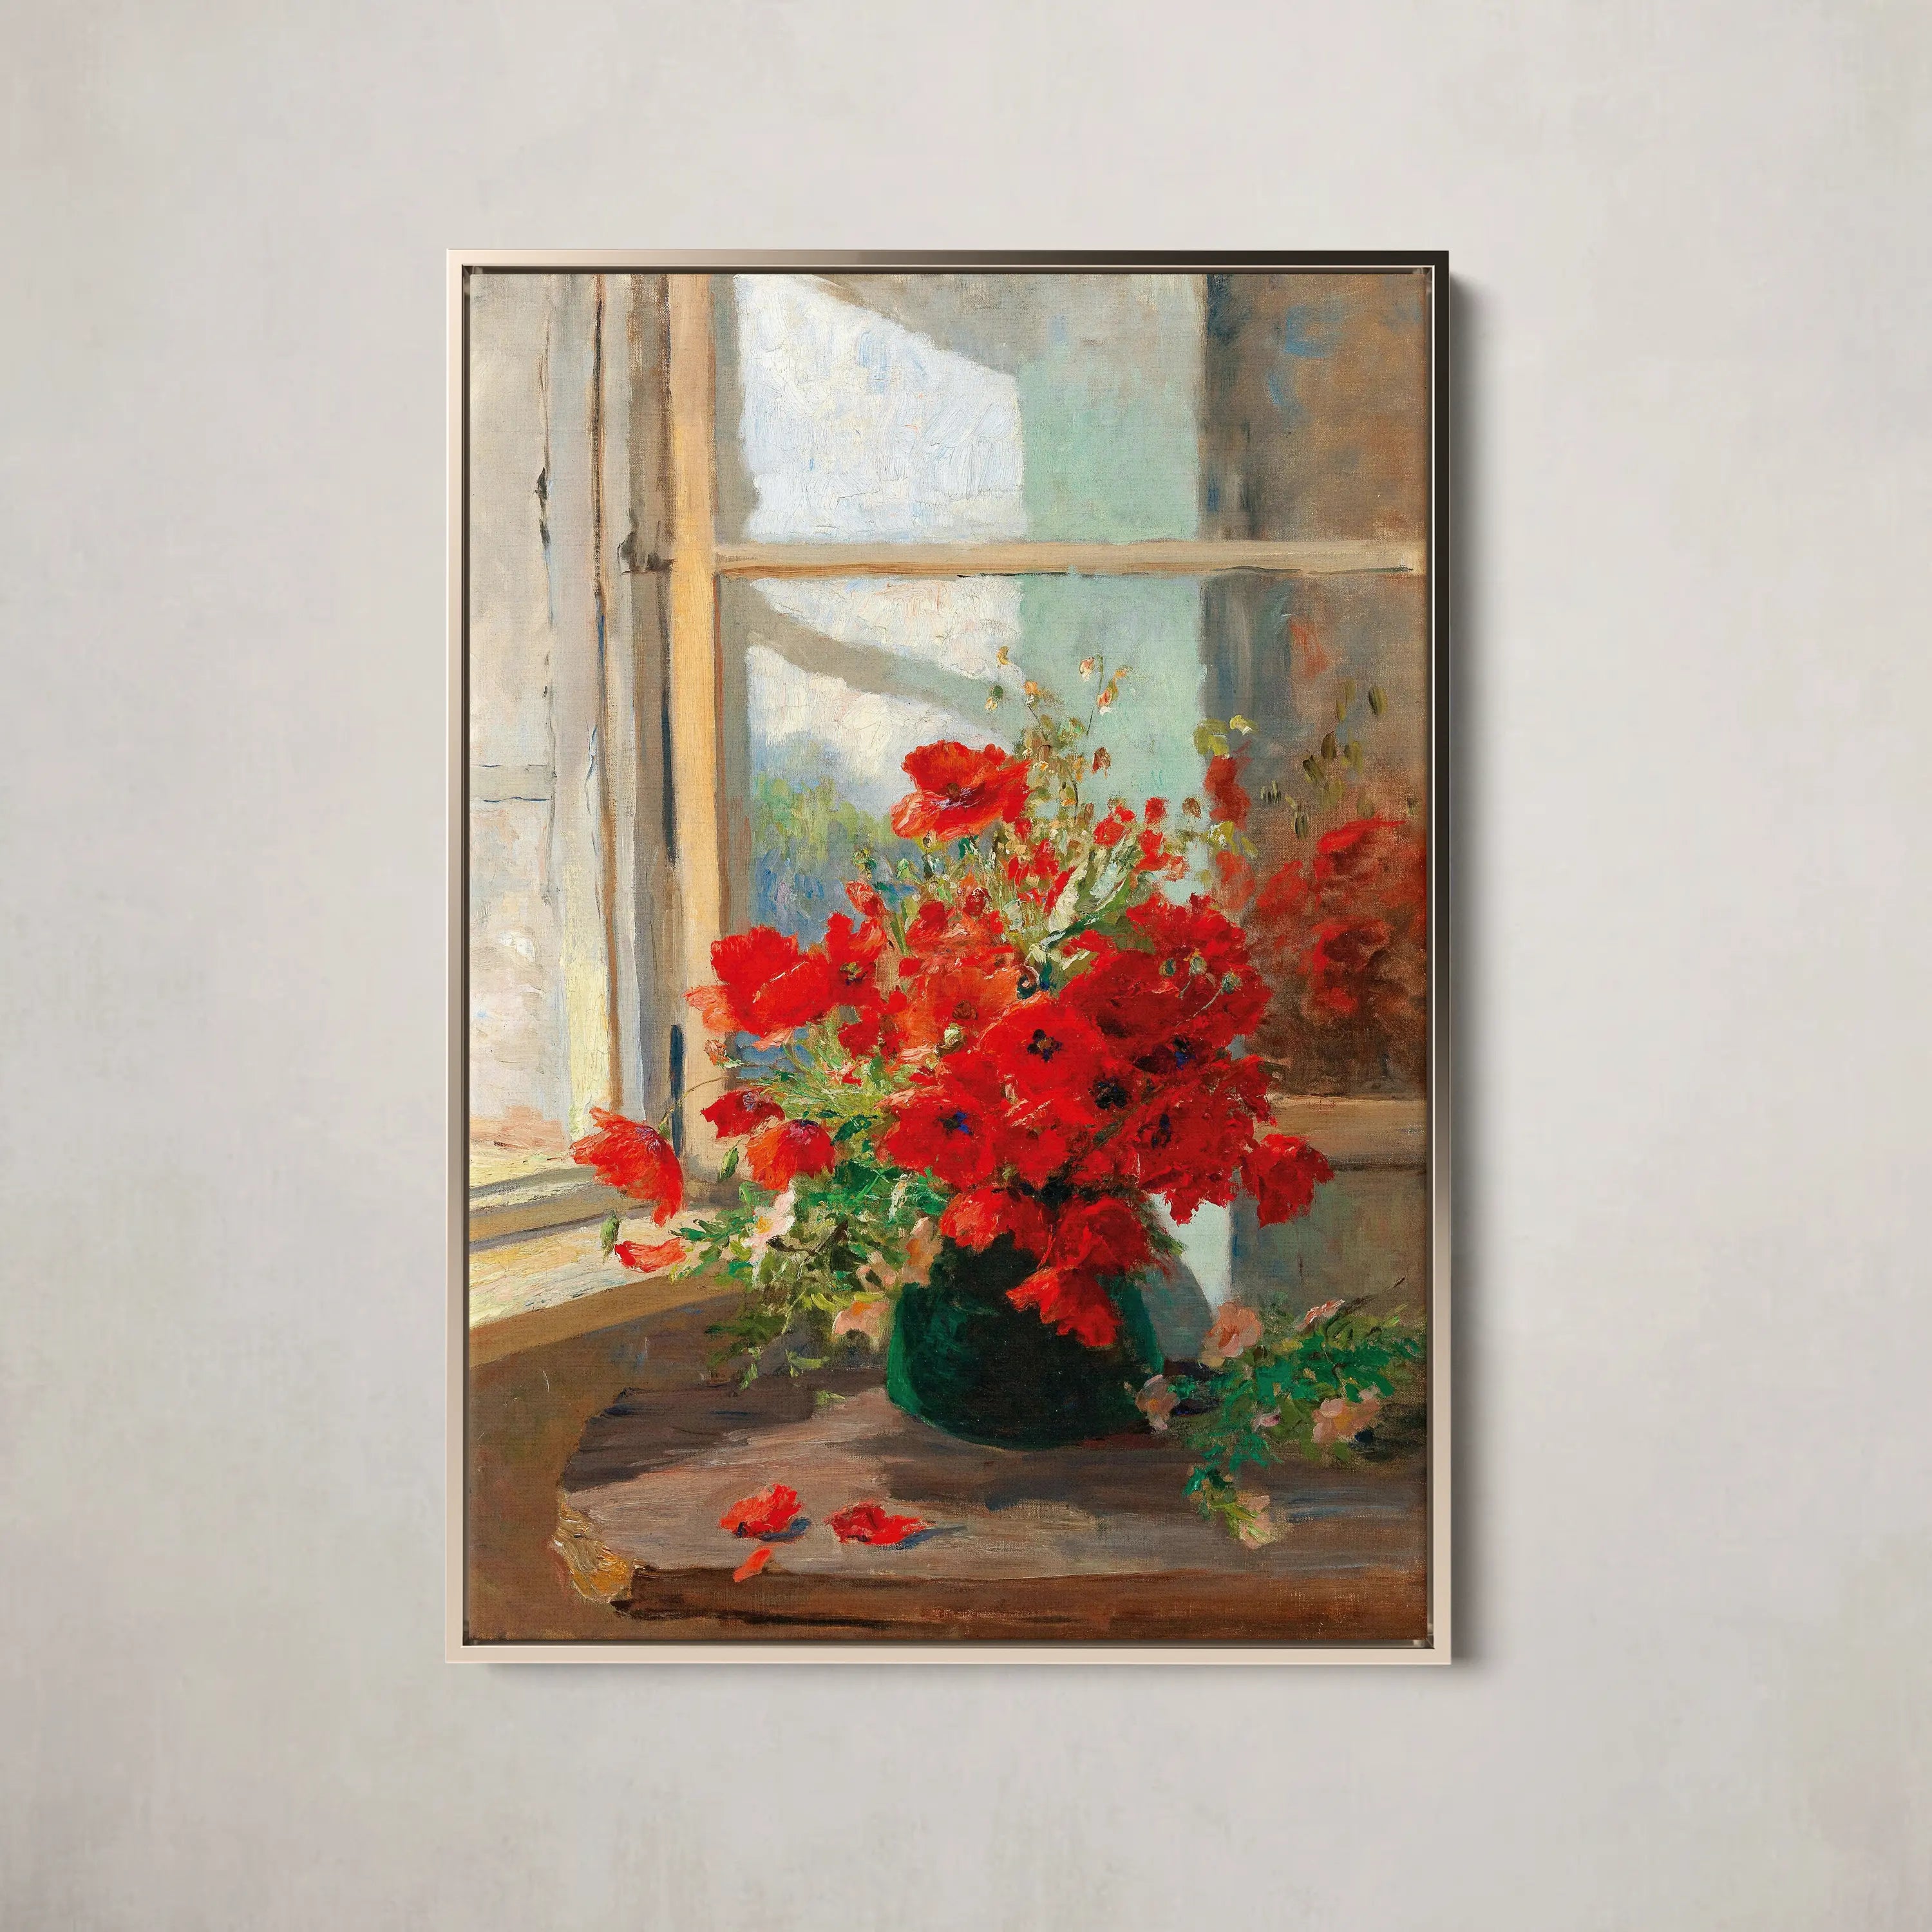 A Bouquet Of Poppies By The Window by Olga Wisinger Florian